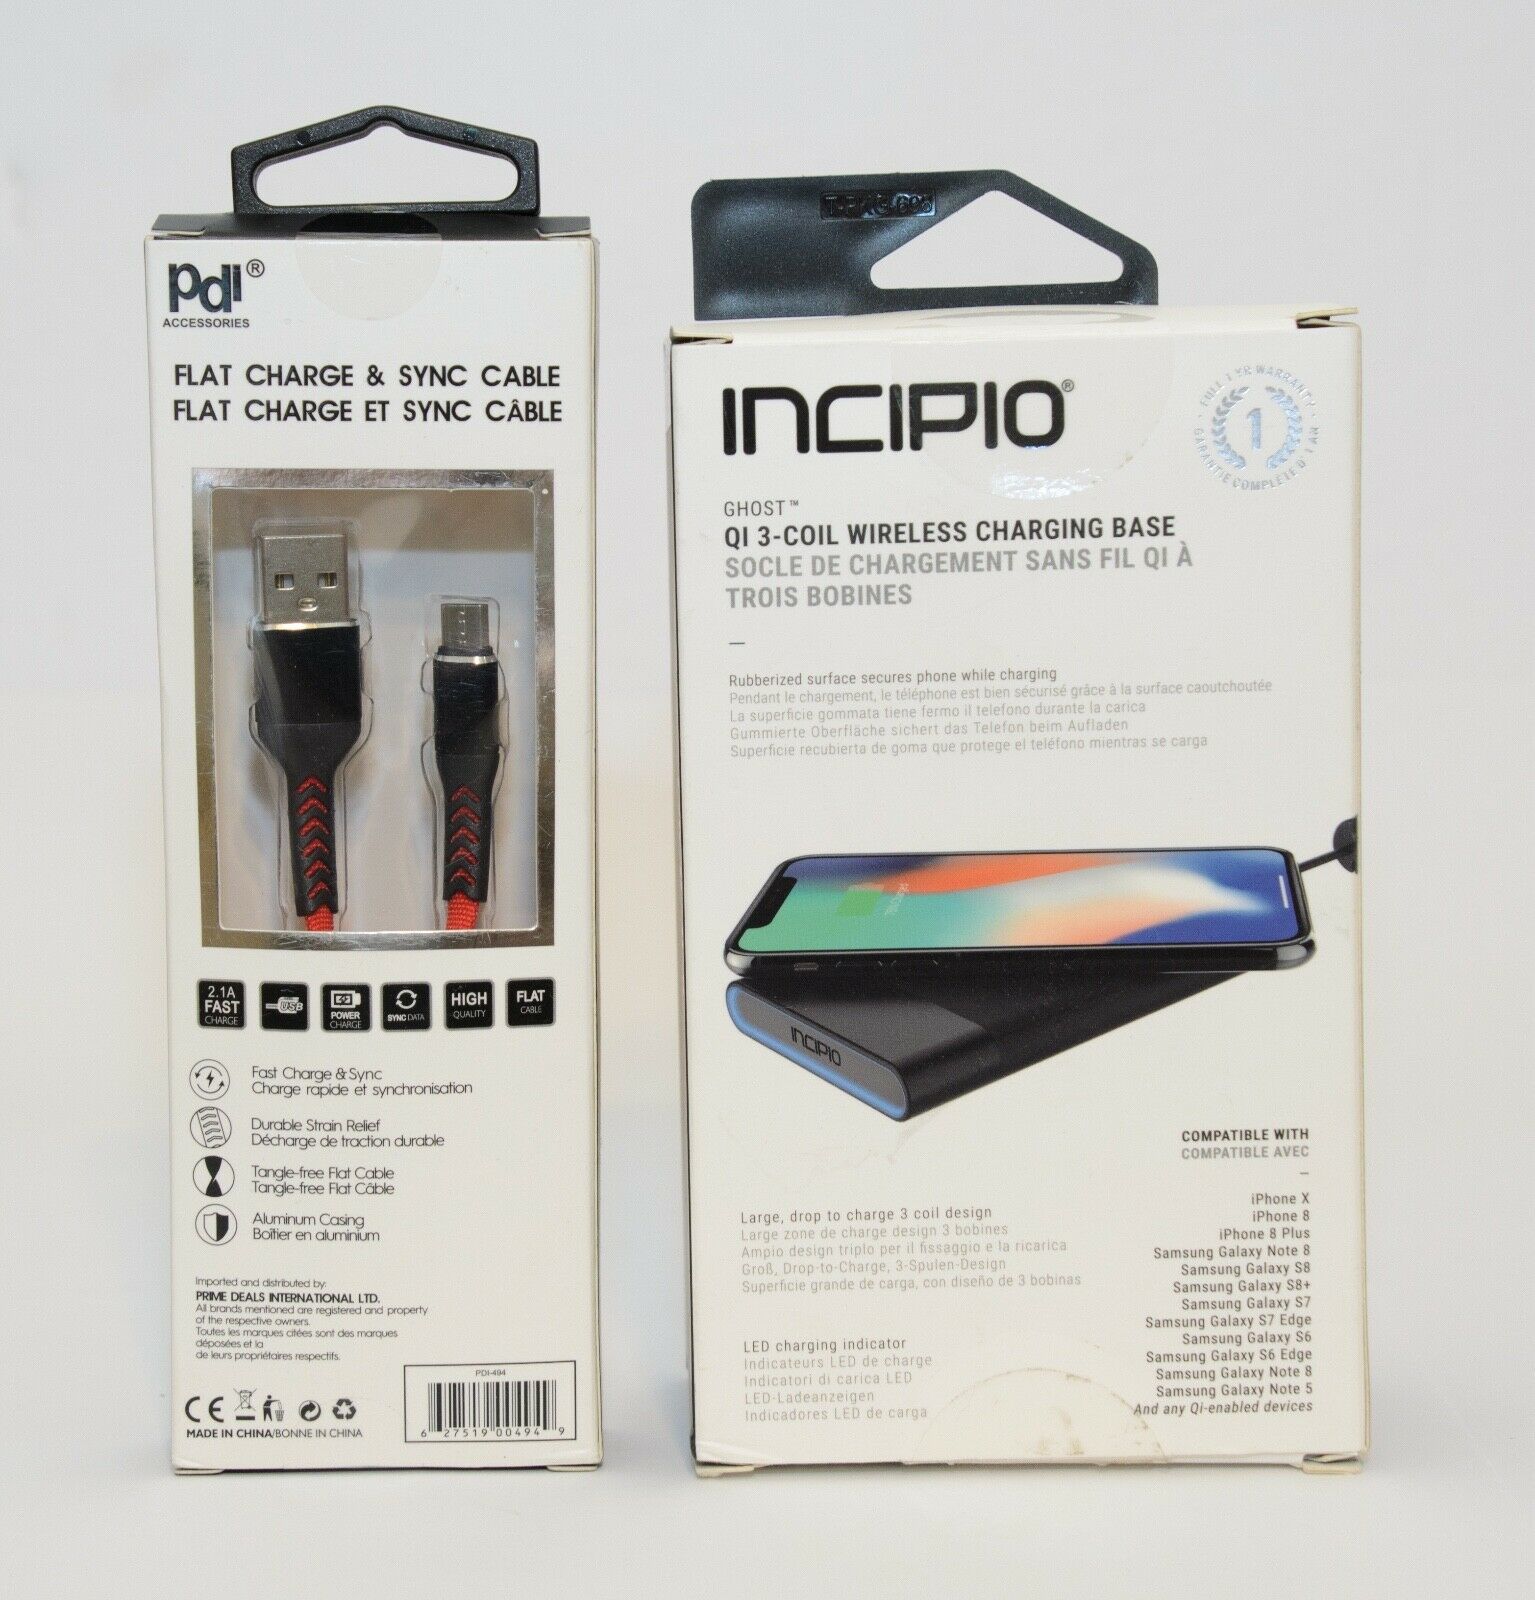 Incipio Ghost QI 3-coil Wireless Charging Base And One Flat Charge & Sync Cable - $21.78